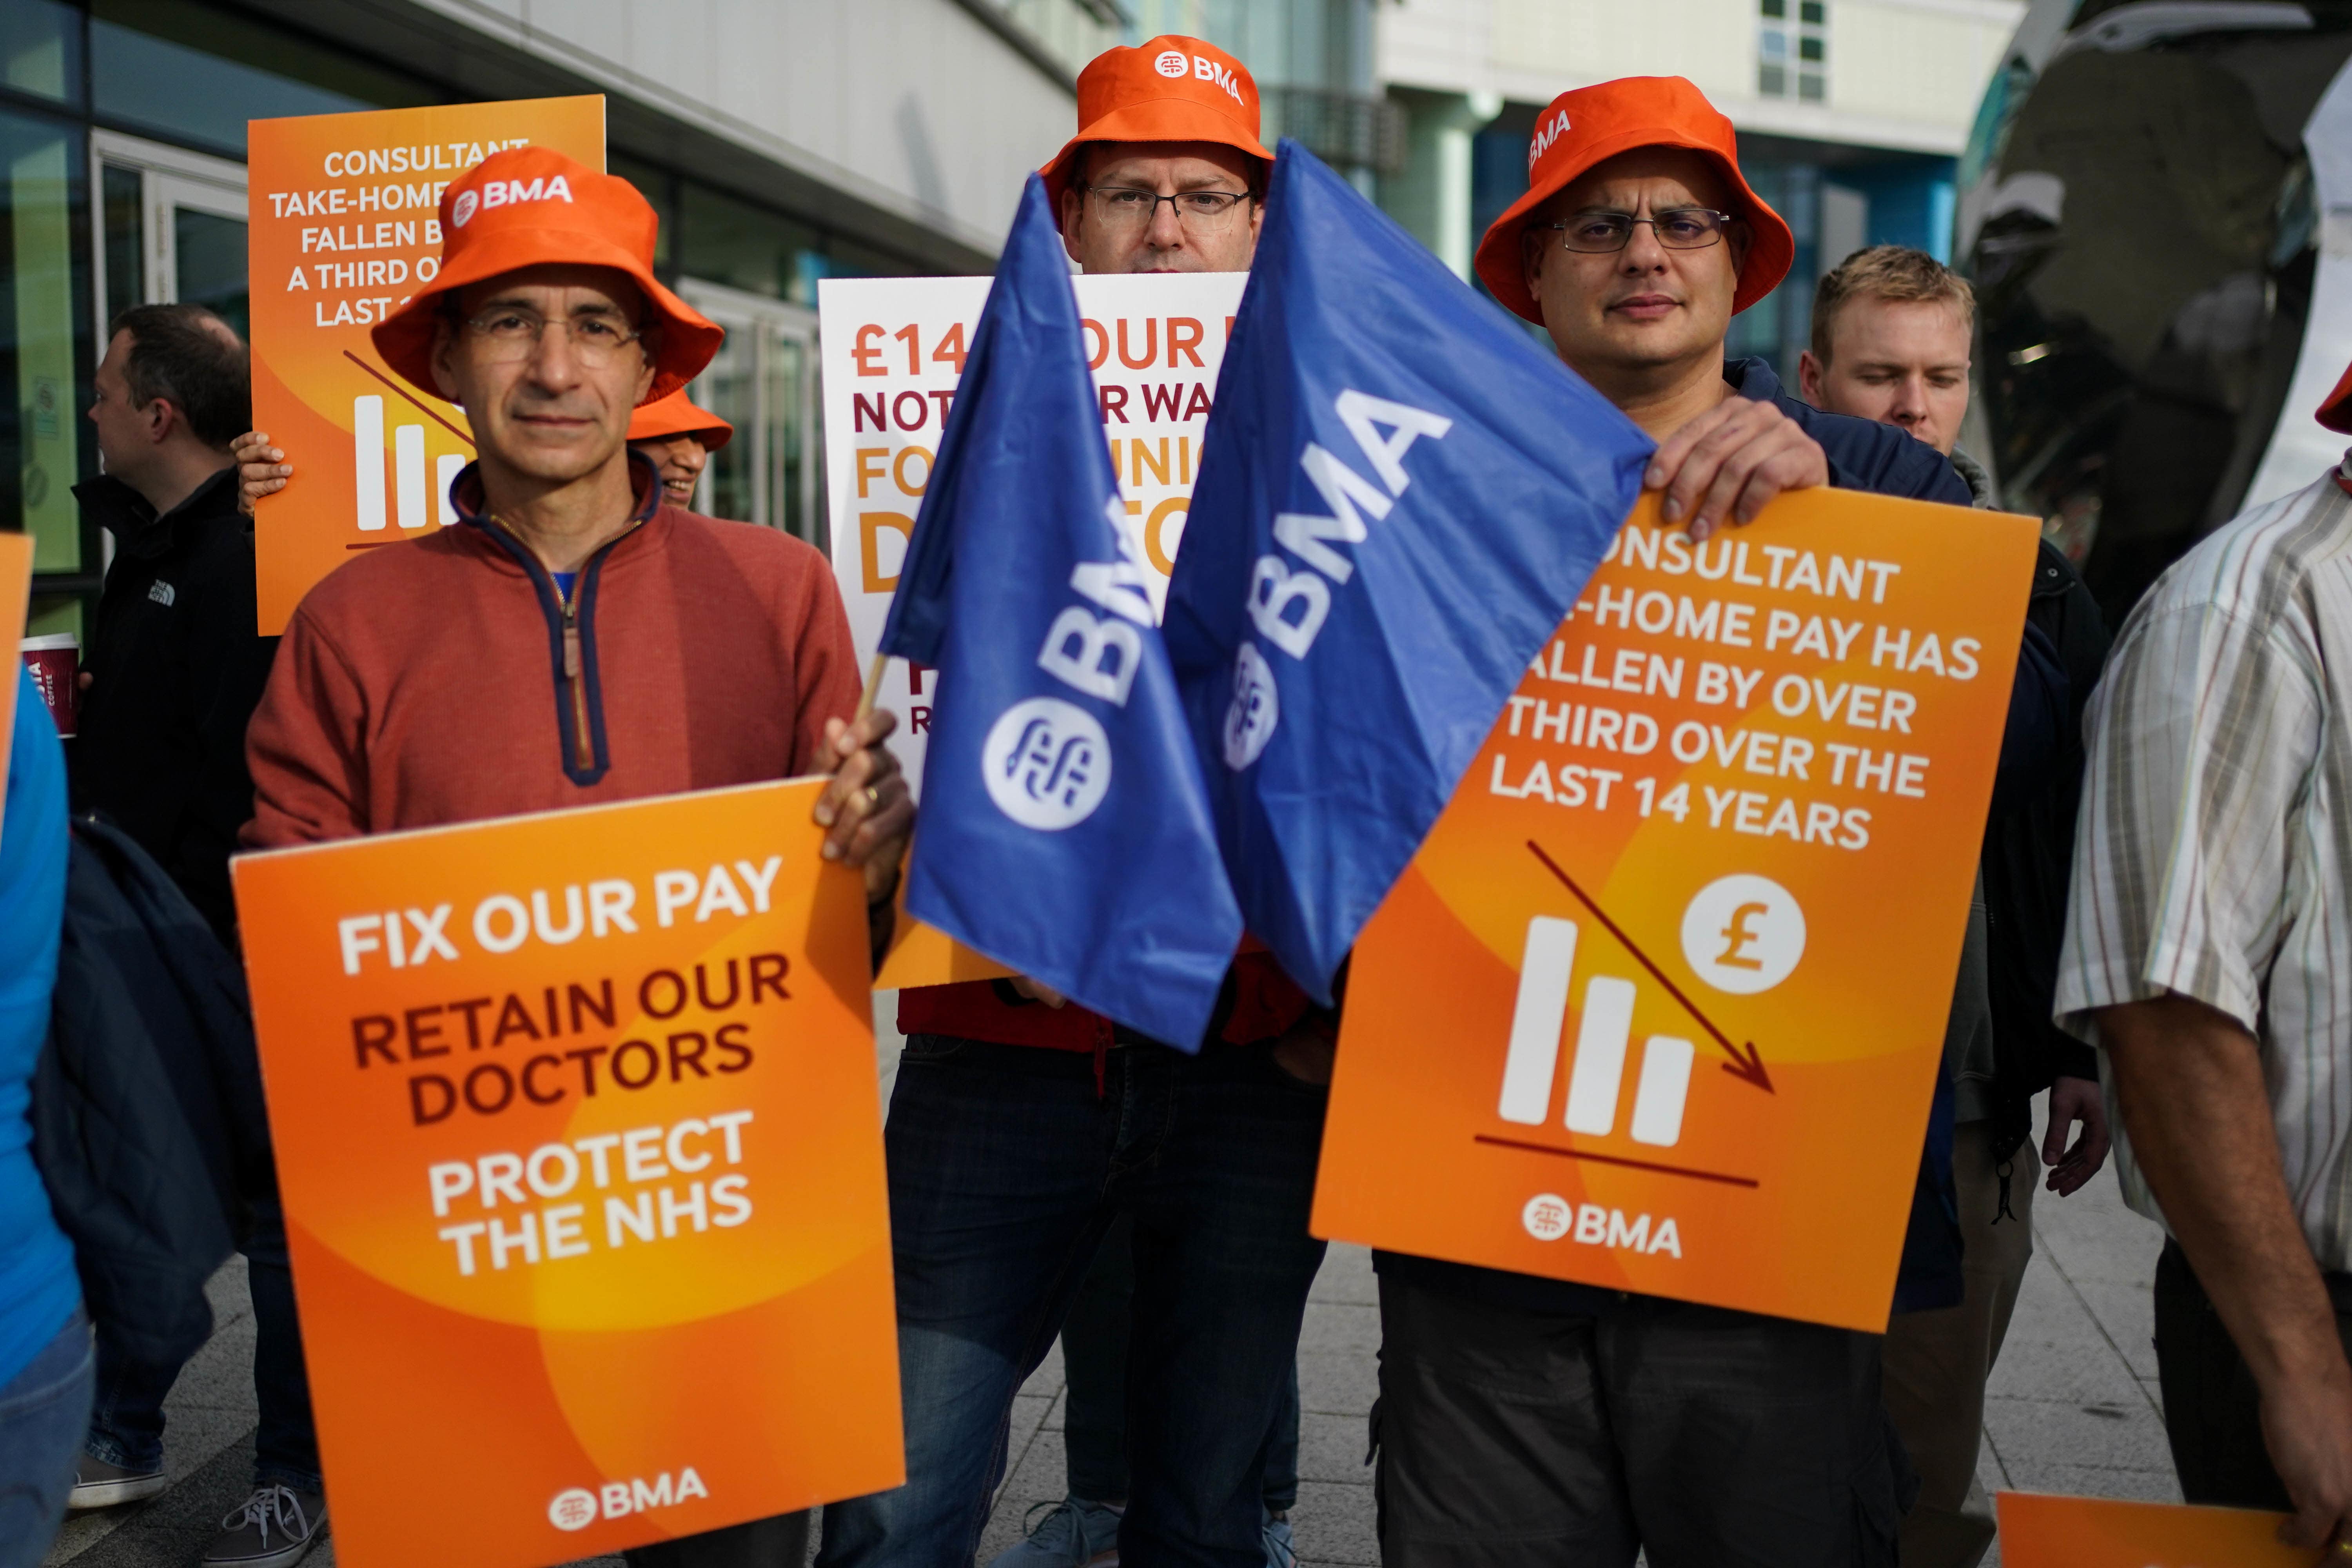 consultants, government, unions, investment, nhs strike breakthrough as consultants’ union agrees new pay deal with government